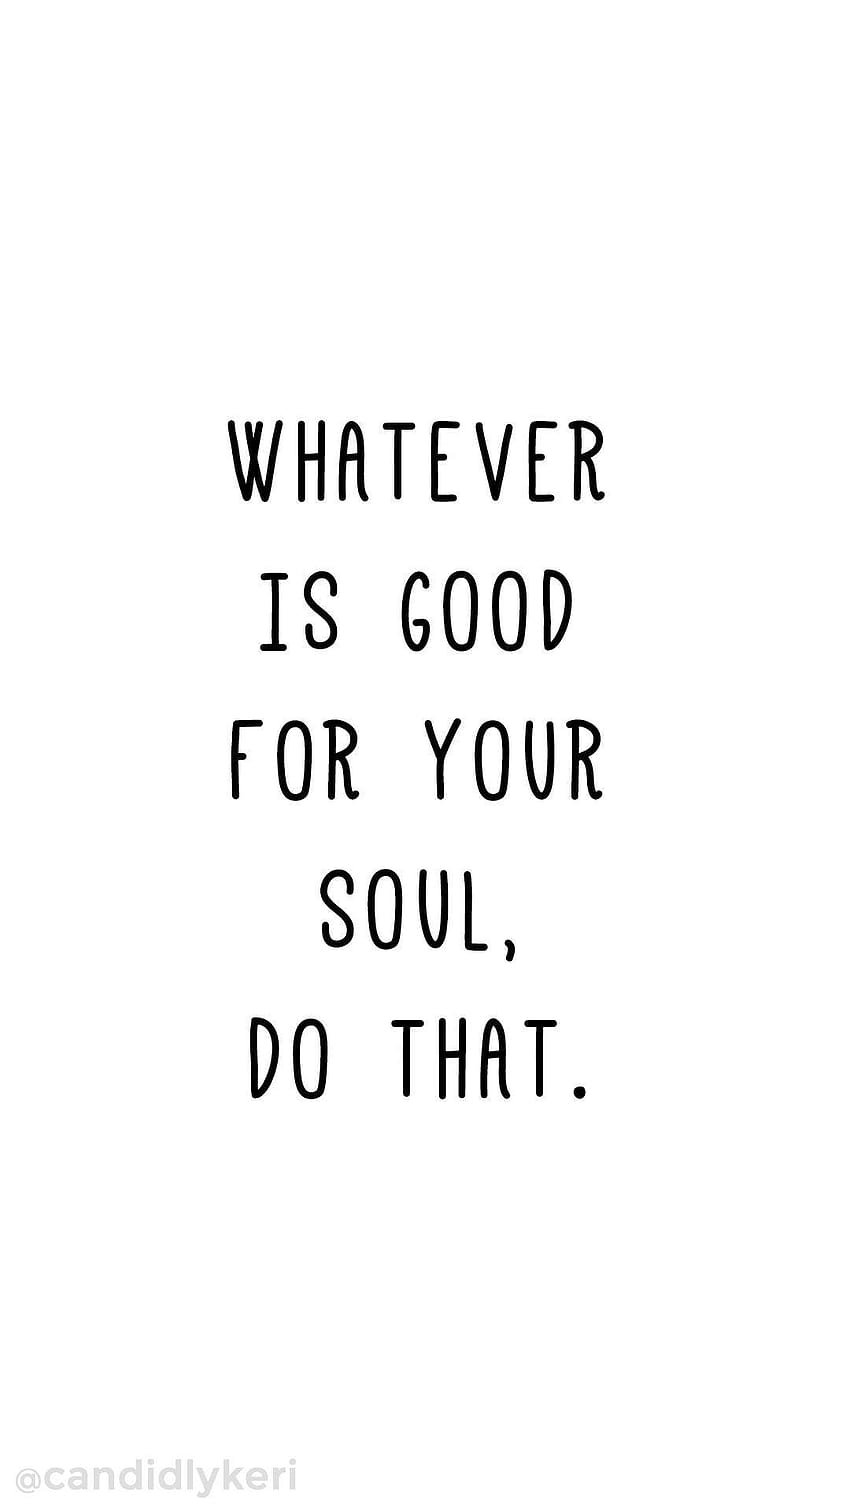 Whatever is good for your soul do that. Quote inspirational HD phone wallpaper